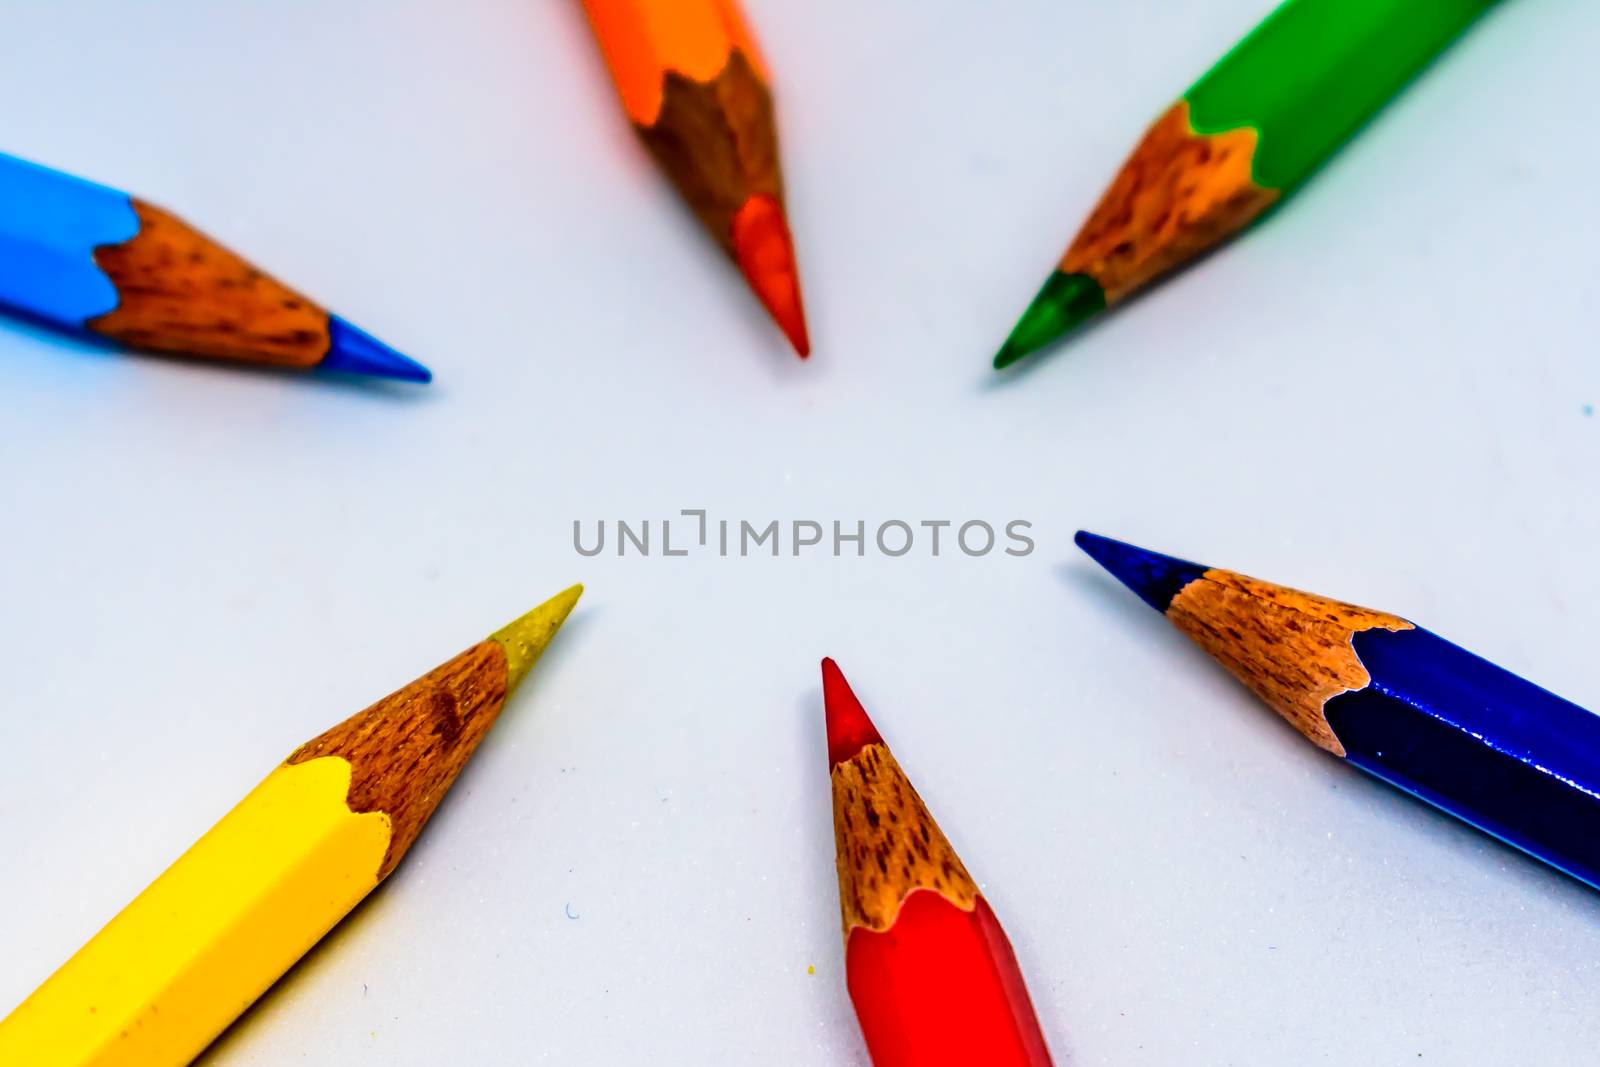 Colored pencil set loosely arranged. by sudiptabhowmick